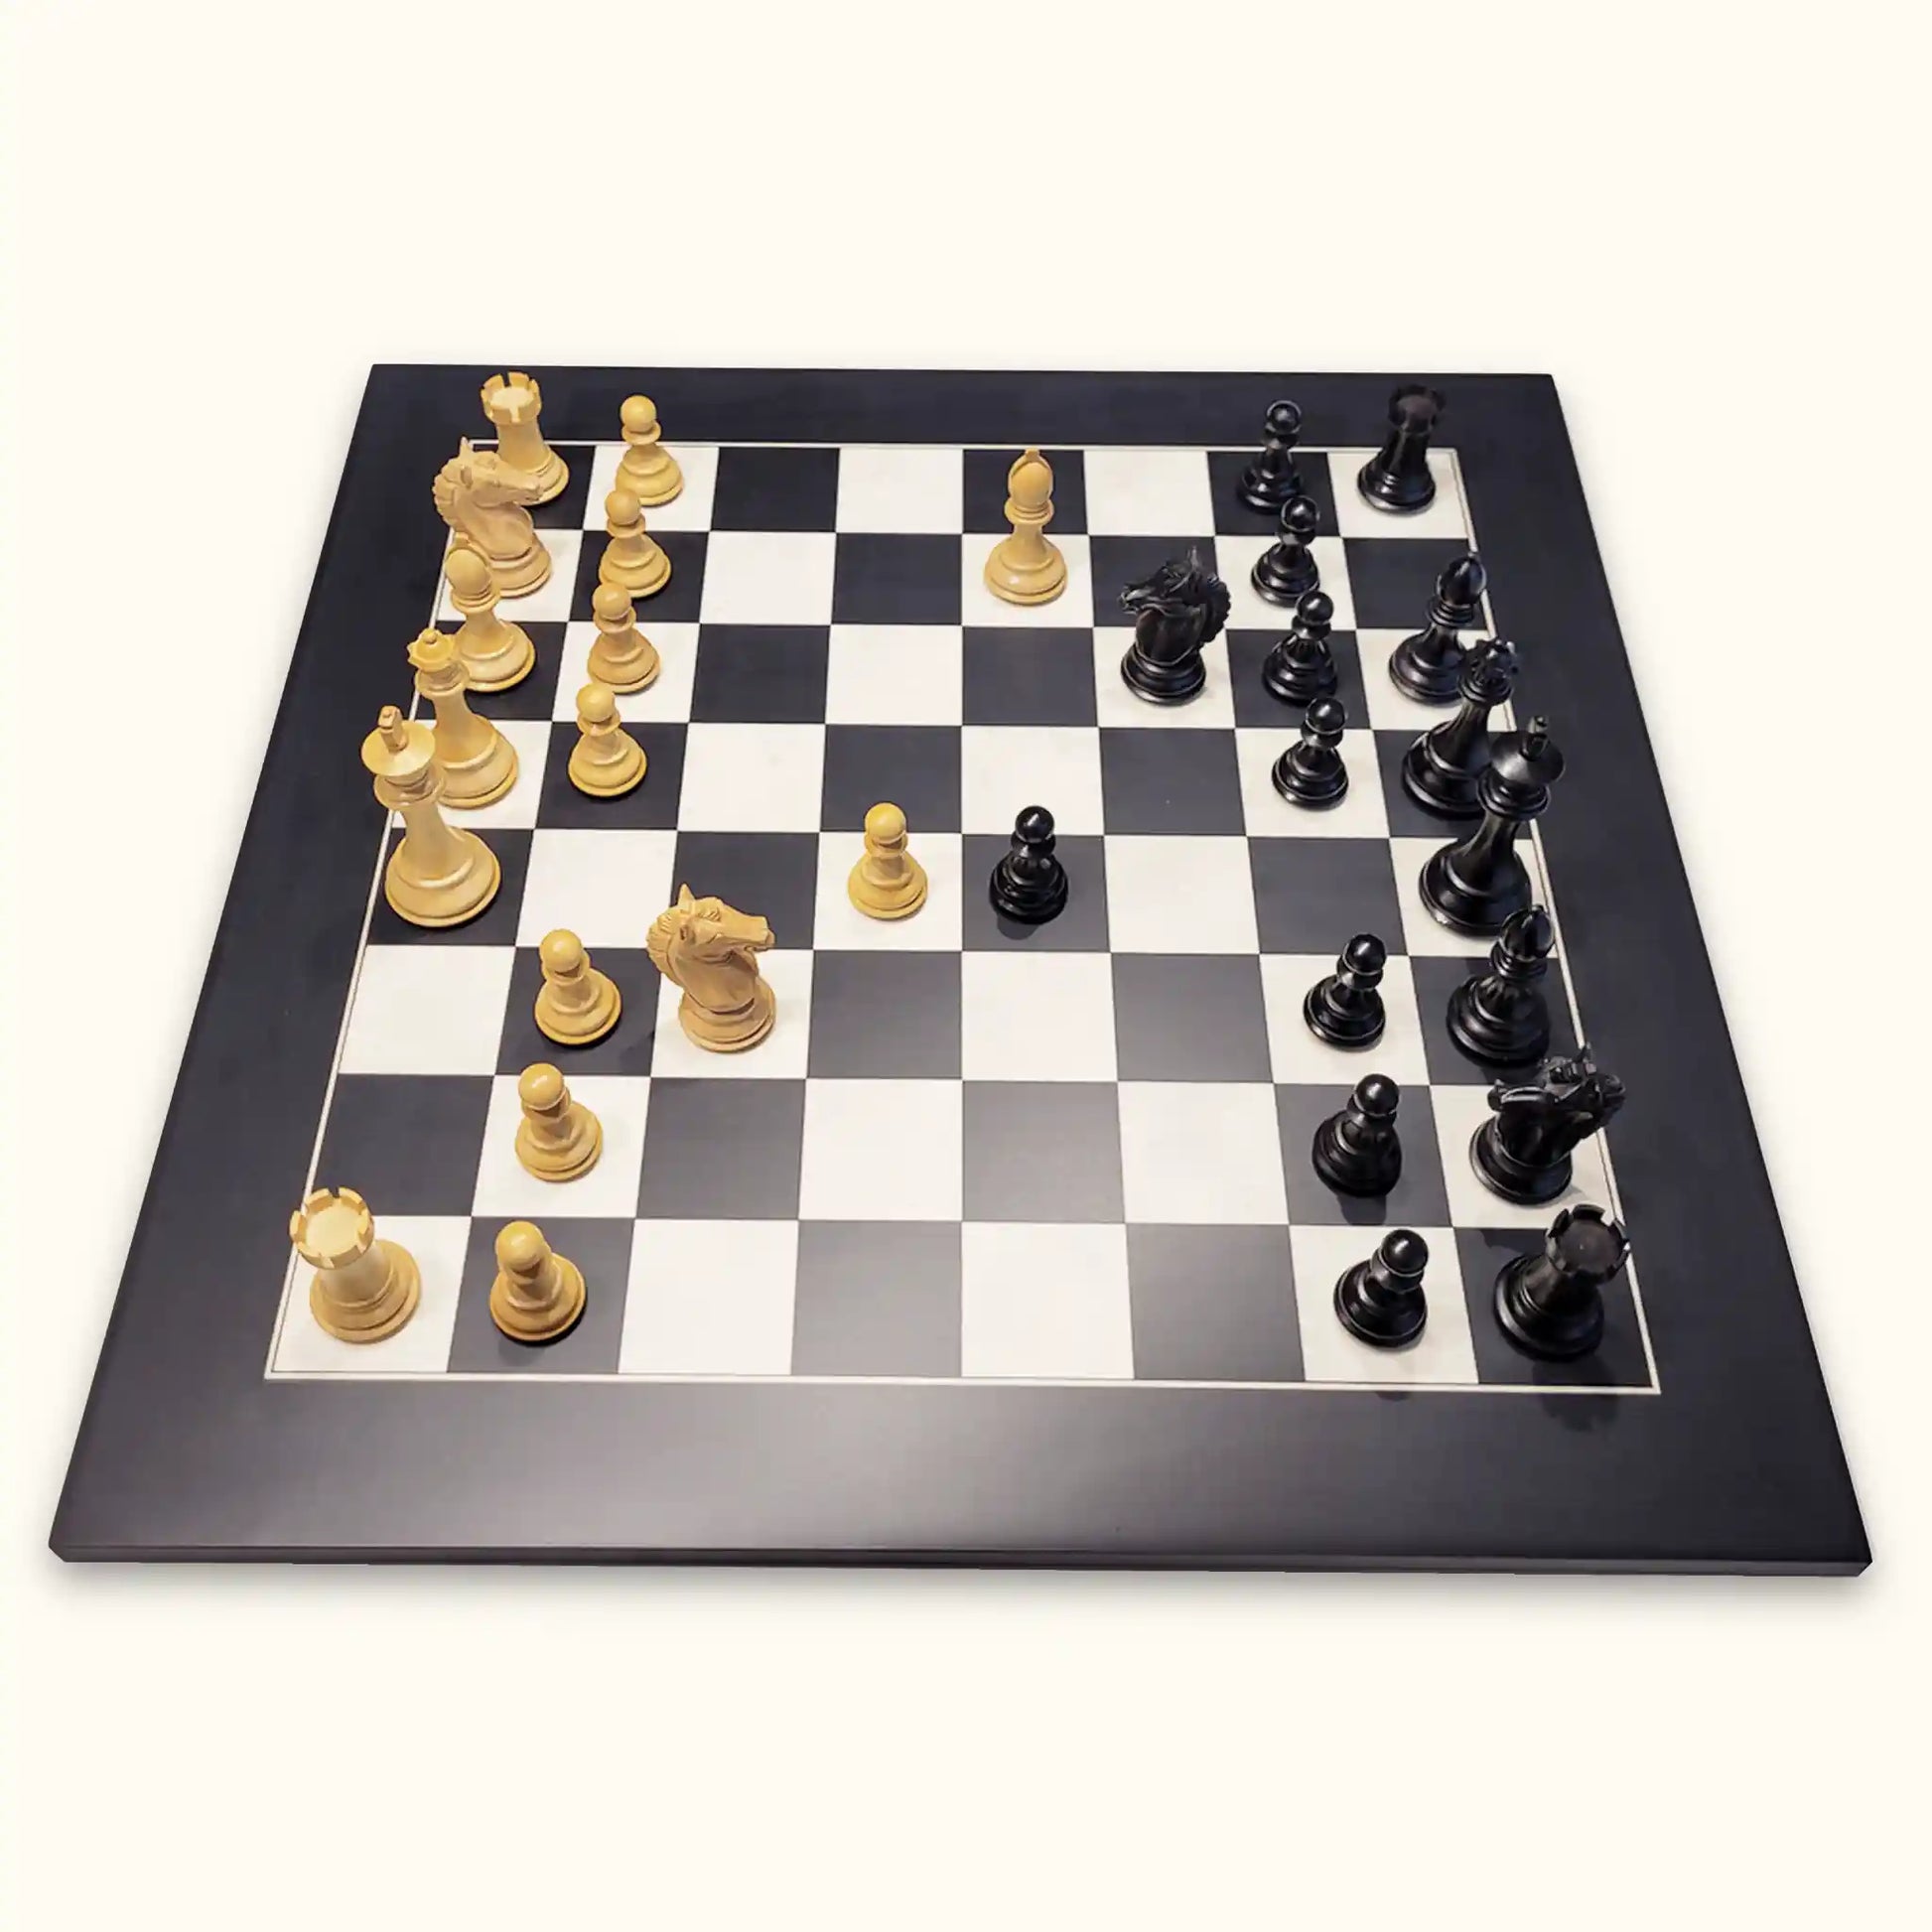 Chess pieces alban knight black on black chessboard side